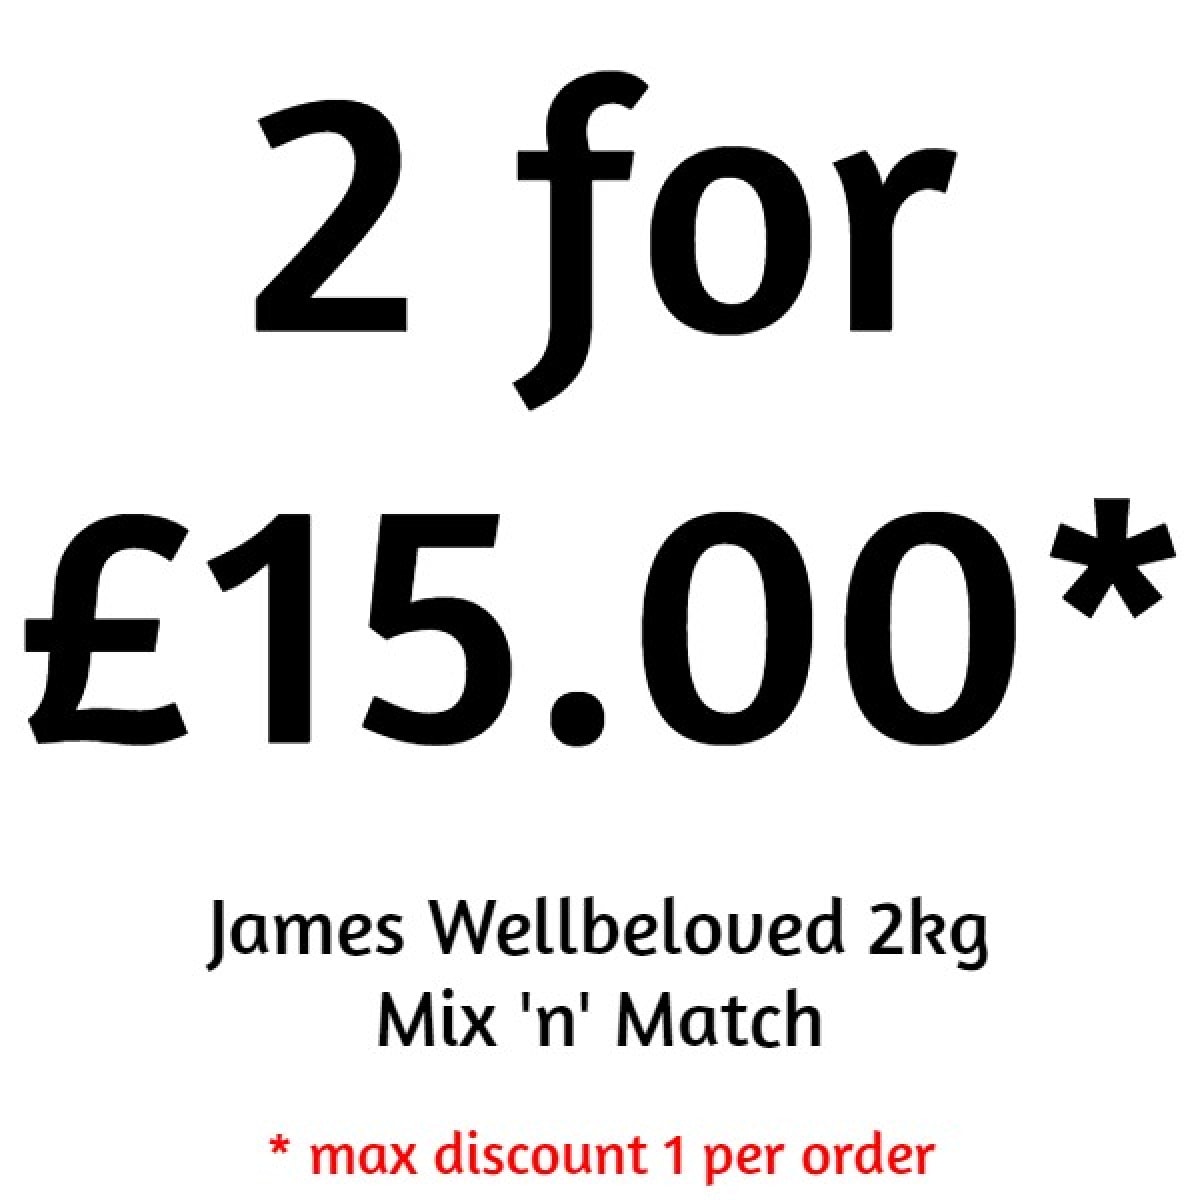 James Wellbeloved – Fish Puppy 2kg – Pawfect Supplies Ltd Product Image